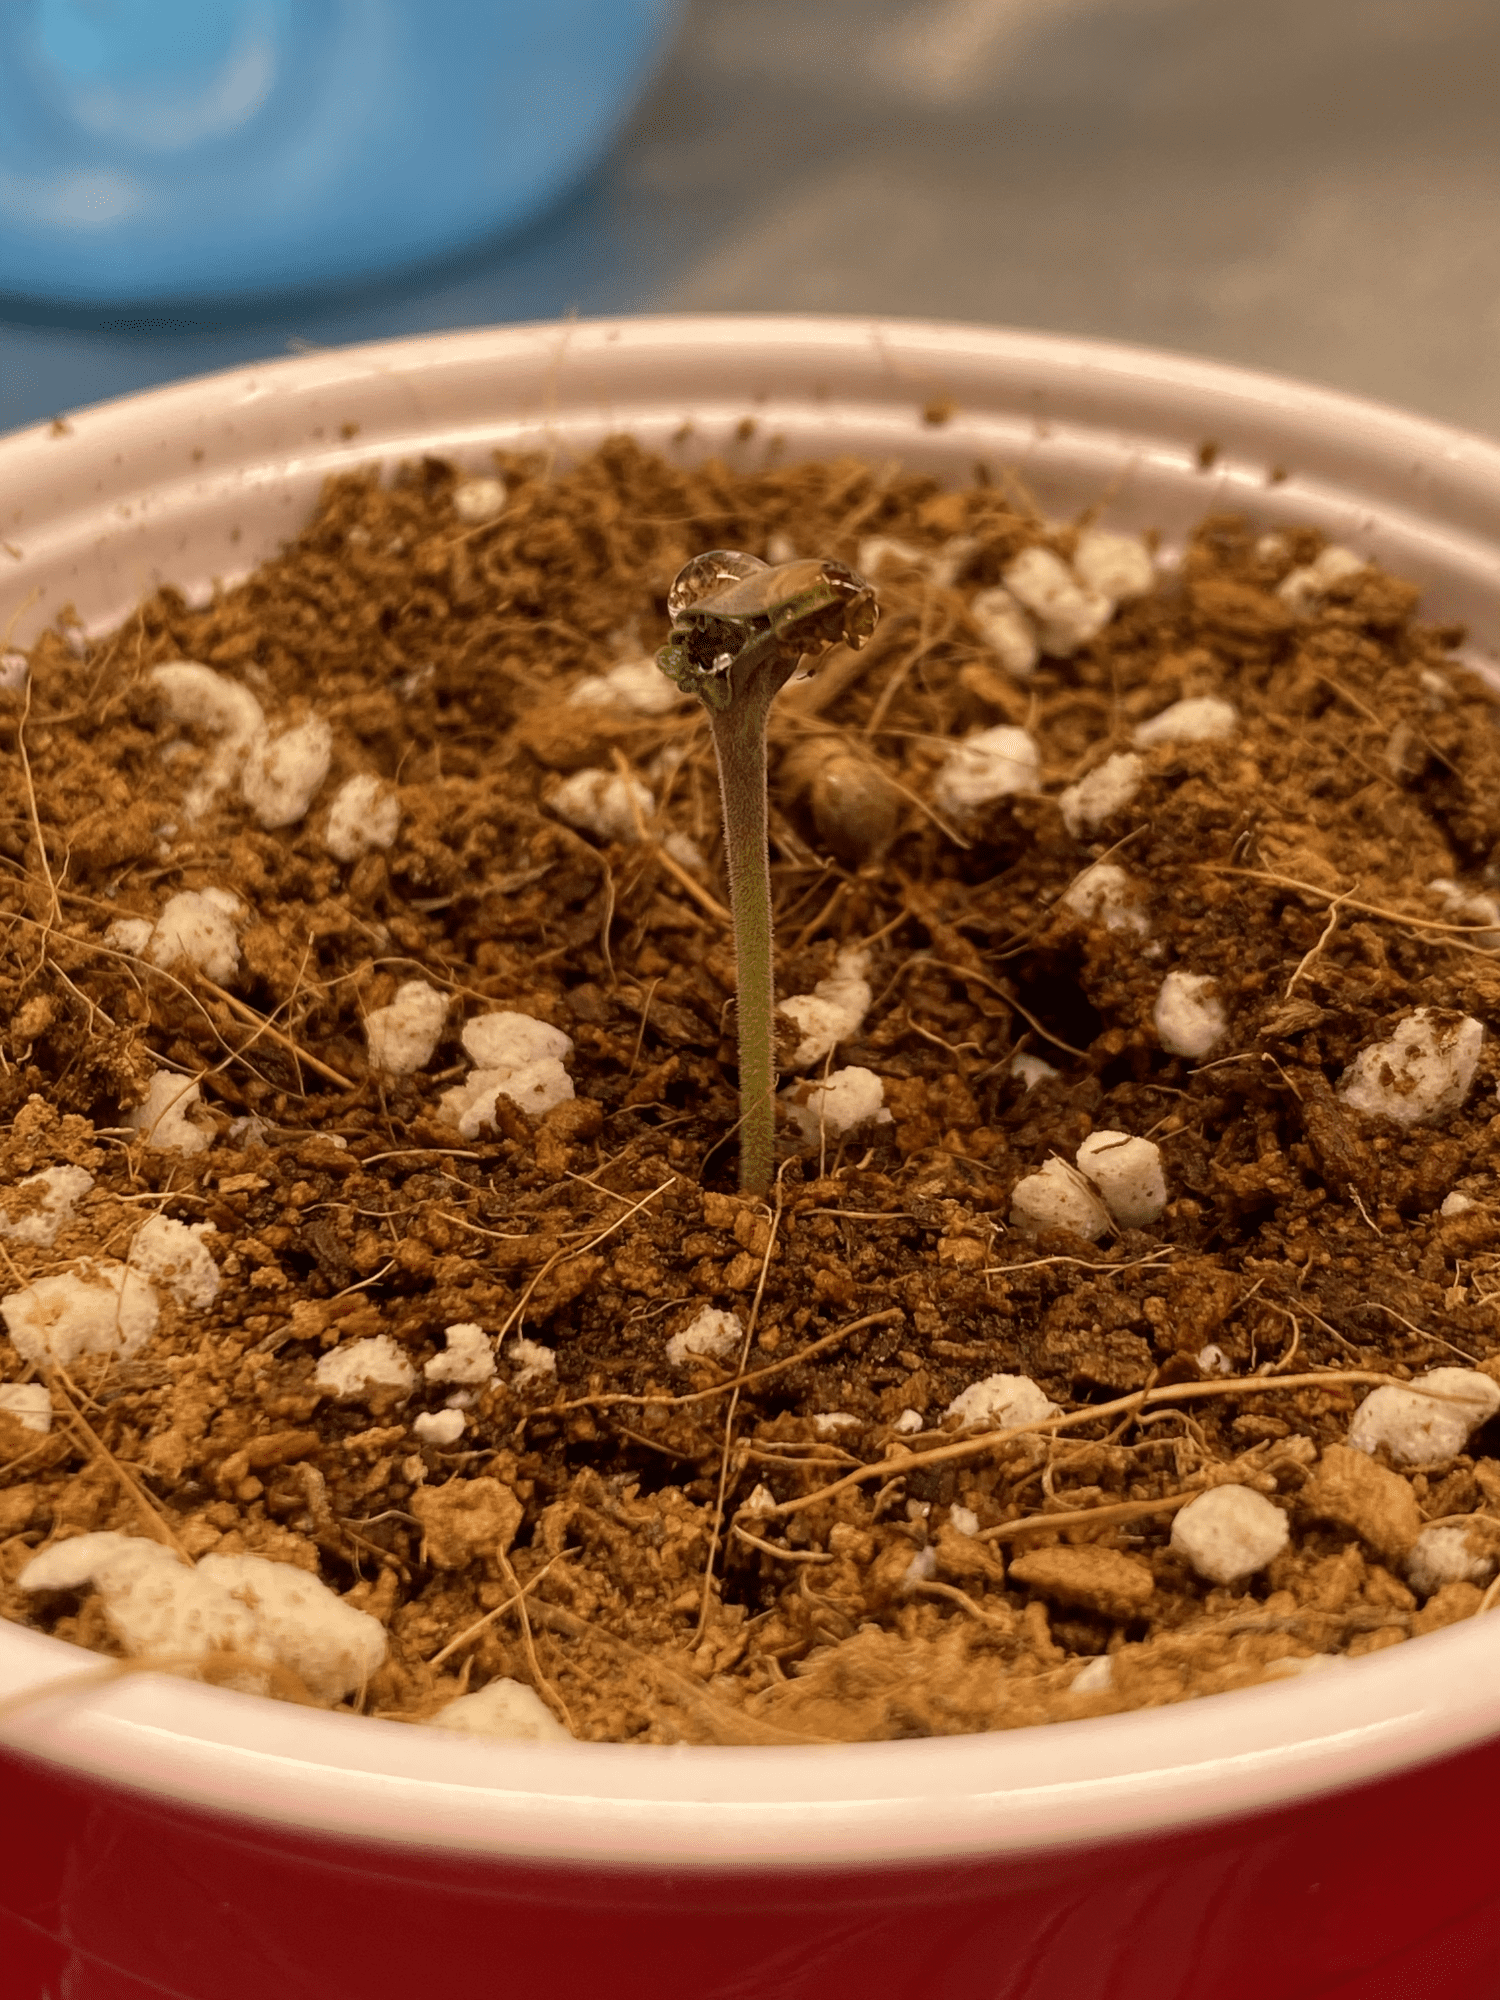 Slow germinationseedling growth